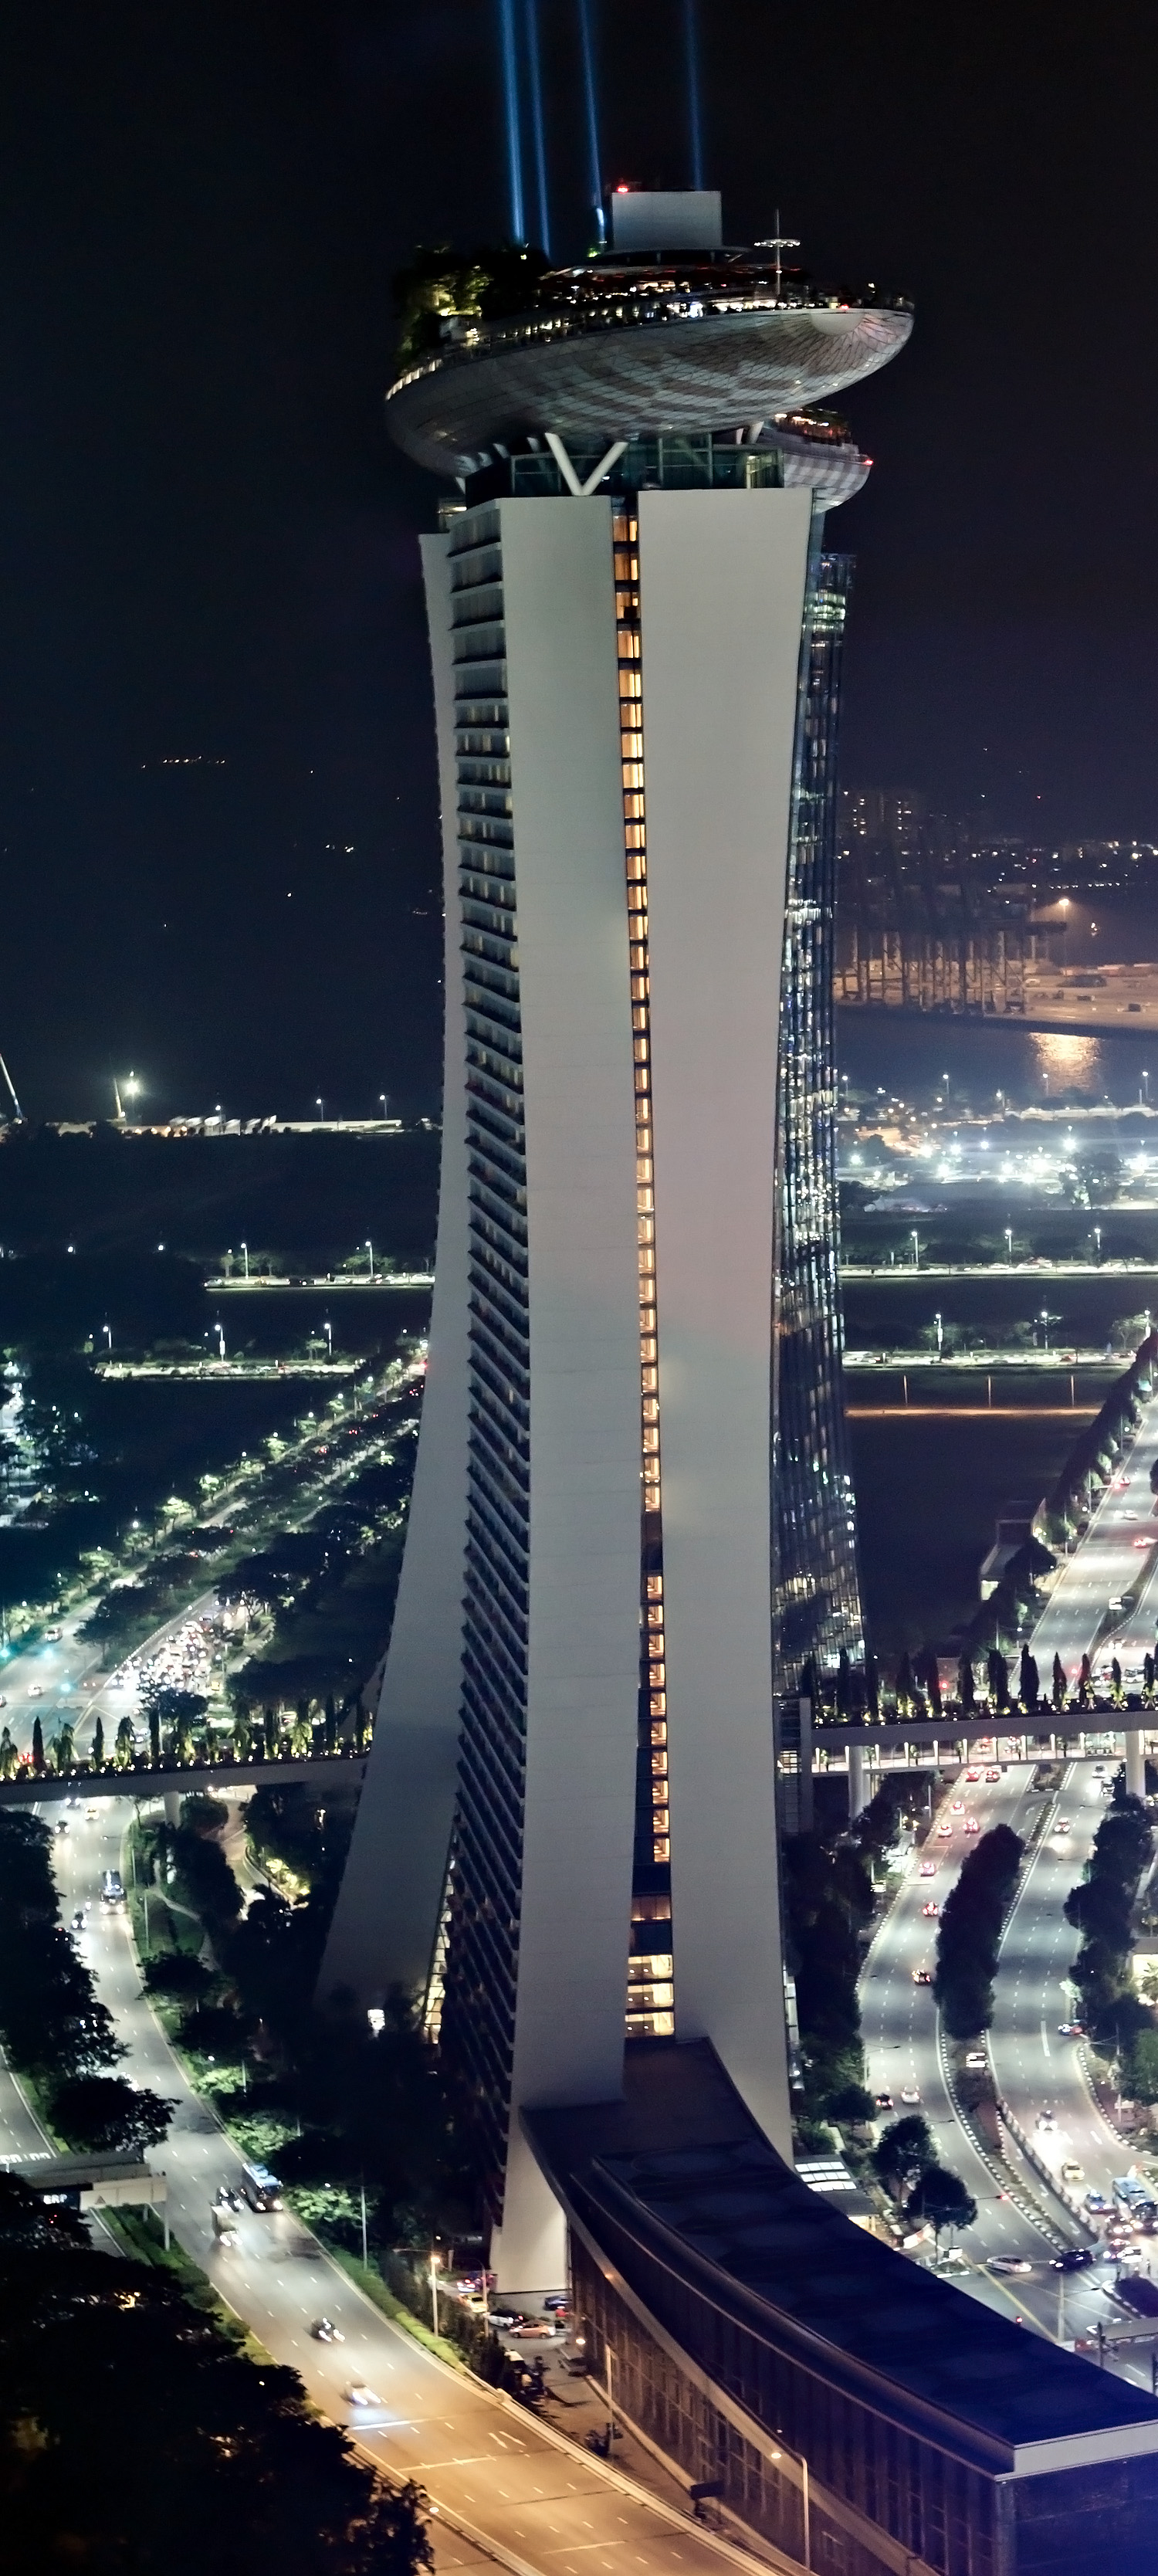 Marina Bay Sands Hotel - View from a ferris wheel 